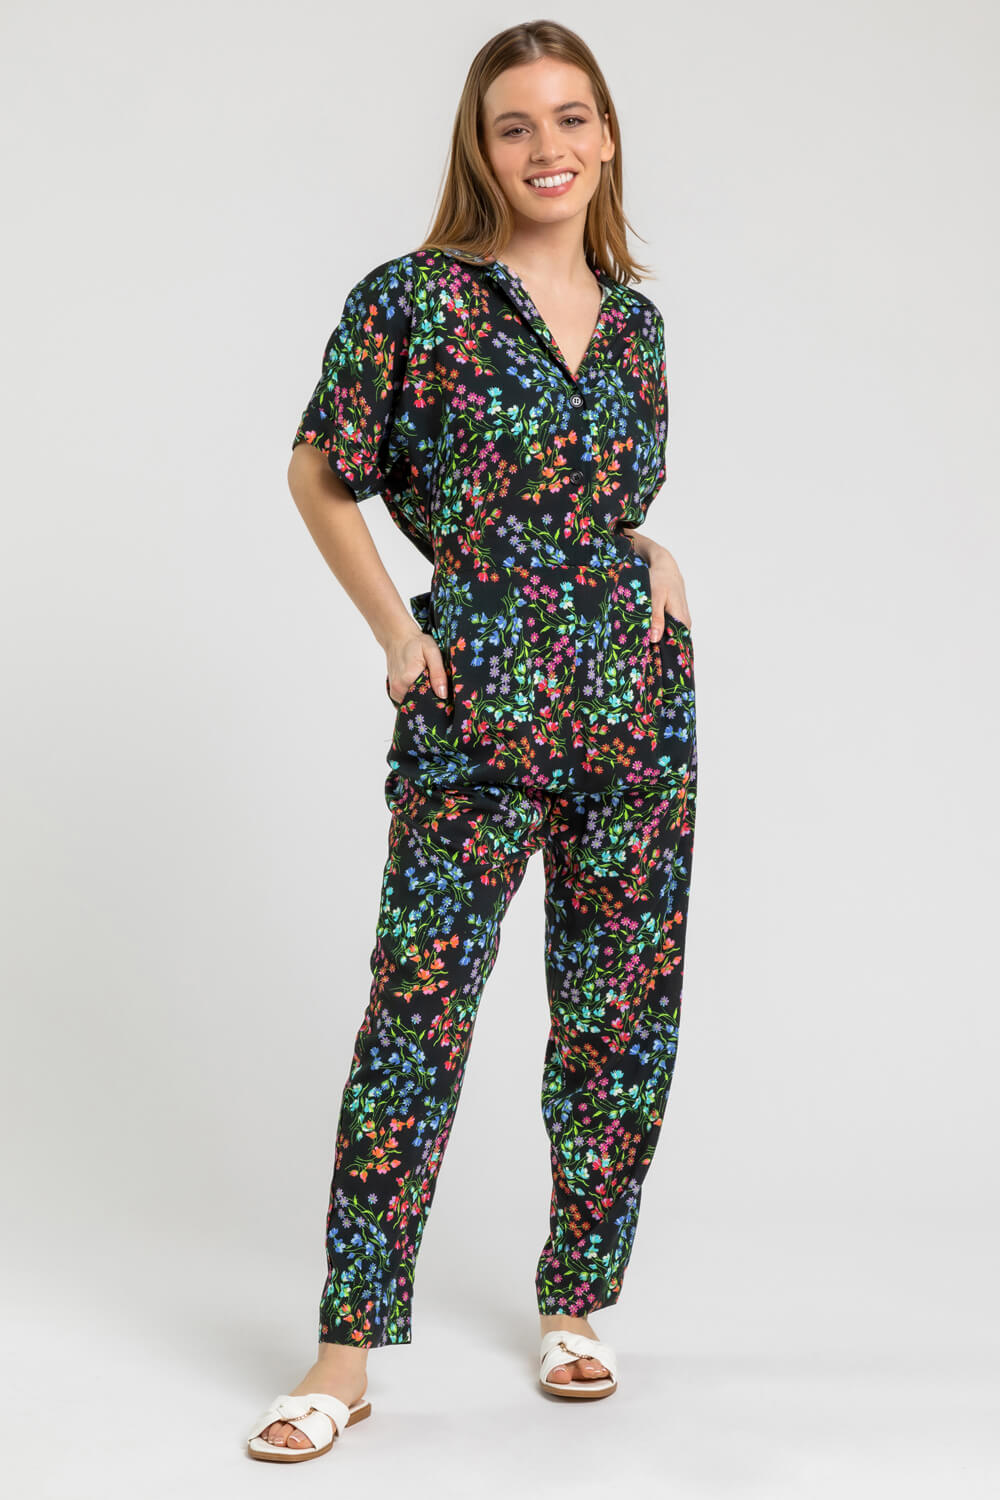 Black Petite Ditsy Floral Collar Jumpsuit, Image 3 of 5